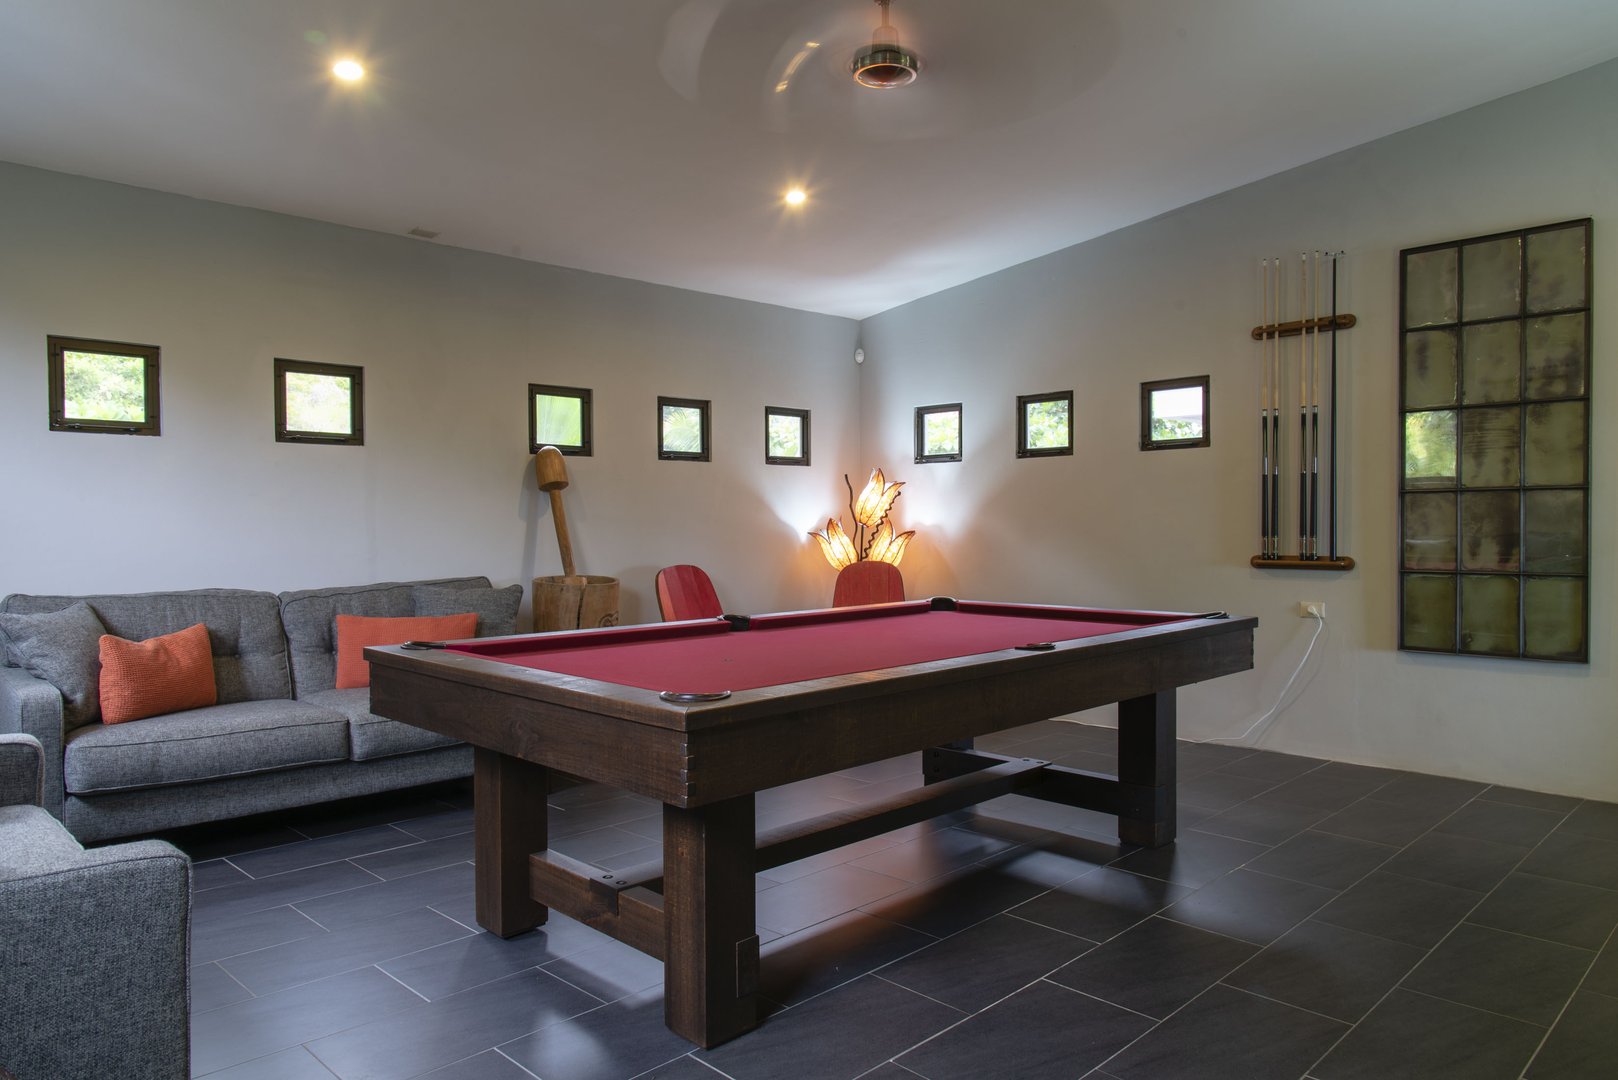 The game room has a sitting area and an awesome pool table to enjoy on your Manuel Antonio vacation.